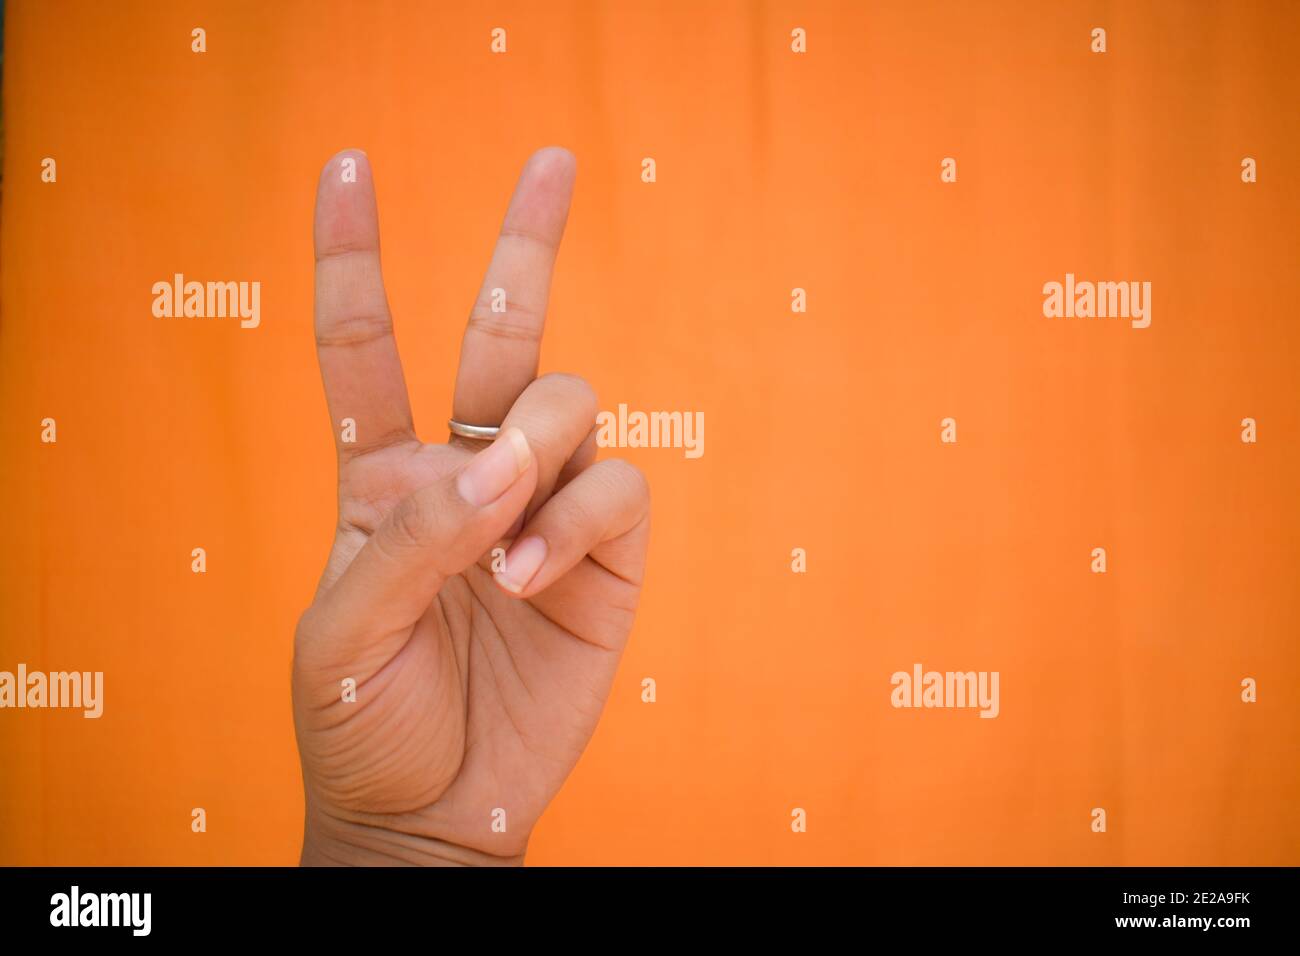 Hand showing victory sign against an orange background Stock Photo